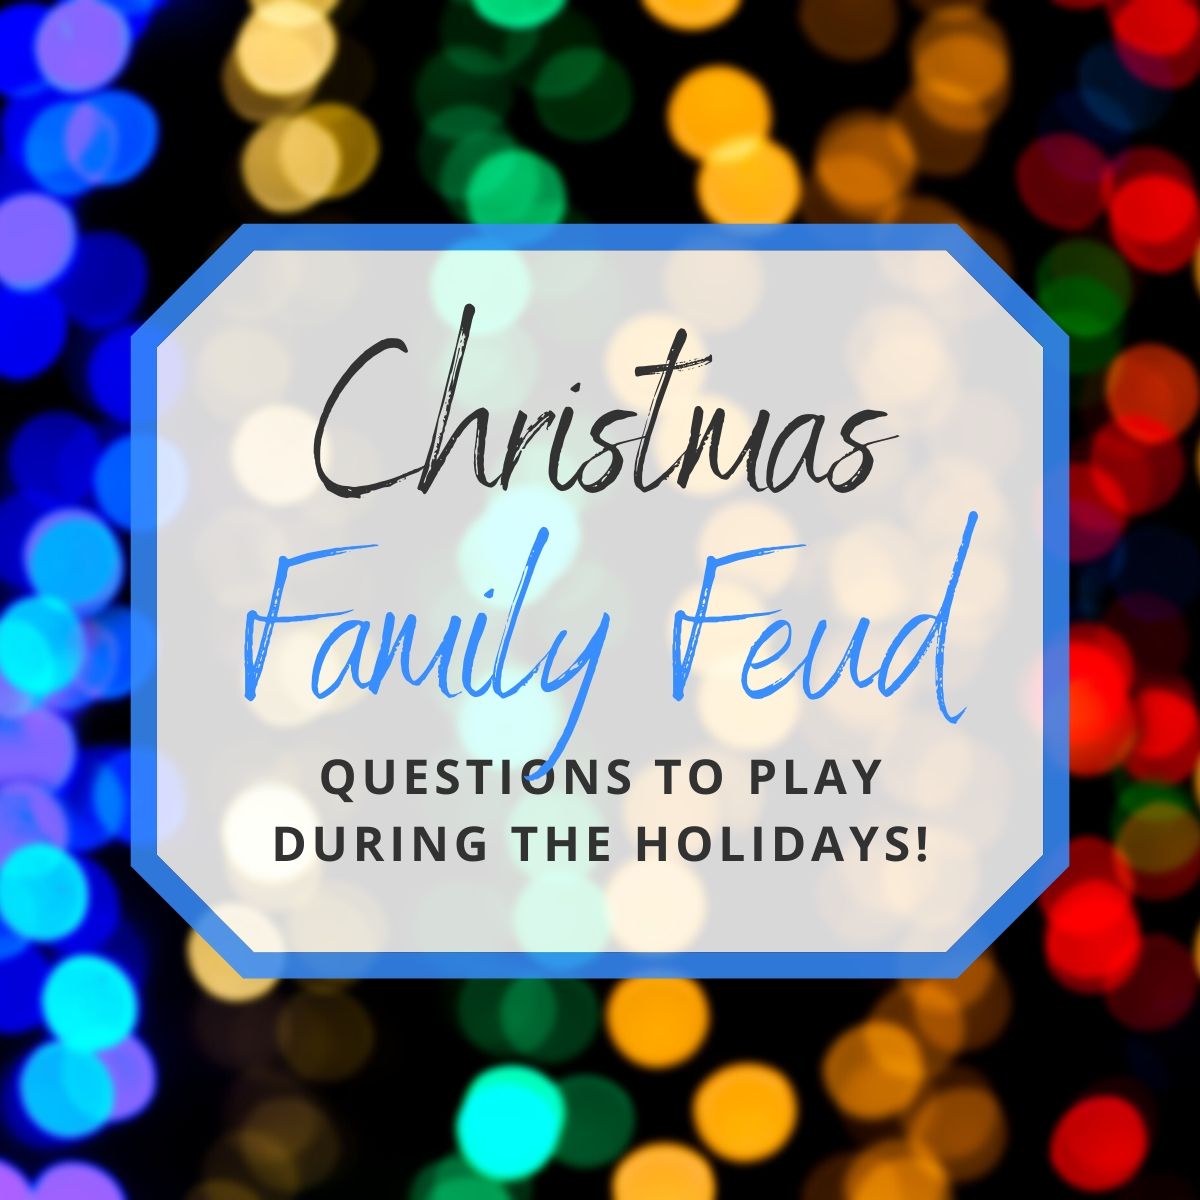 Fun Christmas Family Feud Questions to Play During the Holidays!